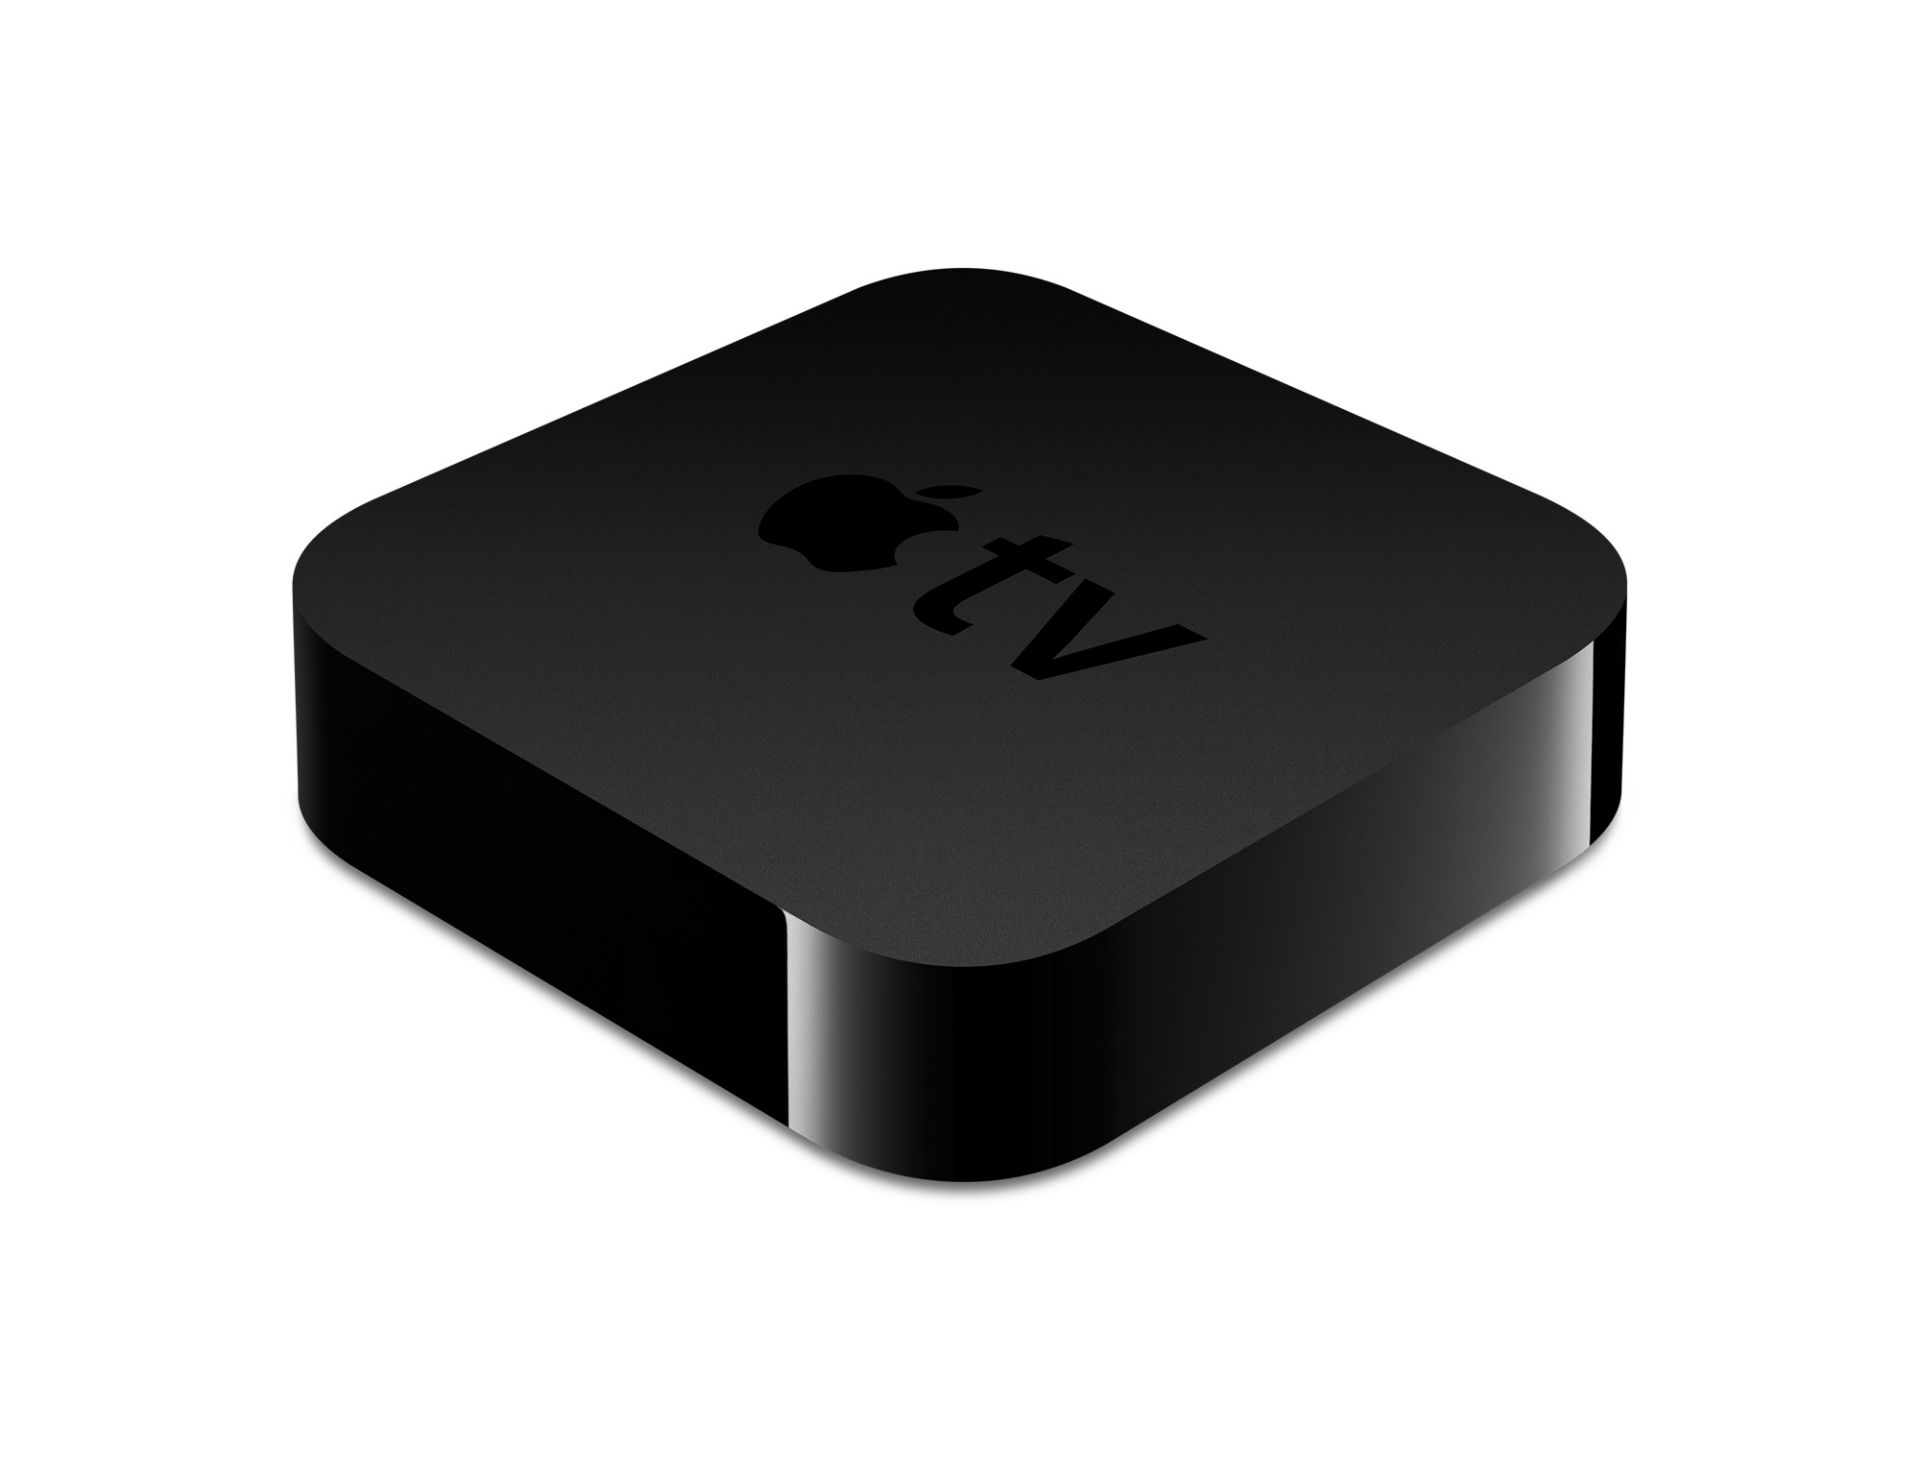 V Grade A Apple TV 3 With HDMI And USB Port X 2 YOUR BID PRICE TO BE MULTIPLIED BY TWO